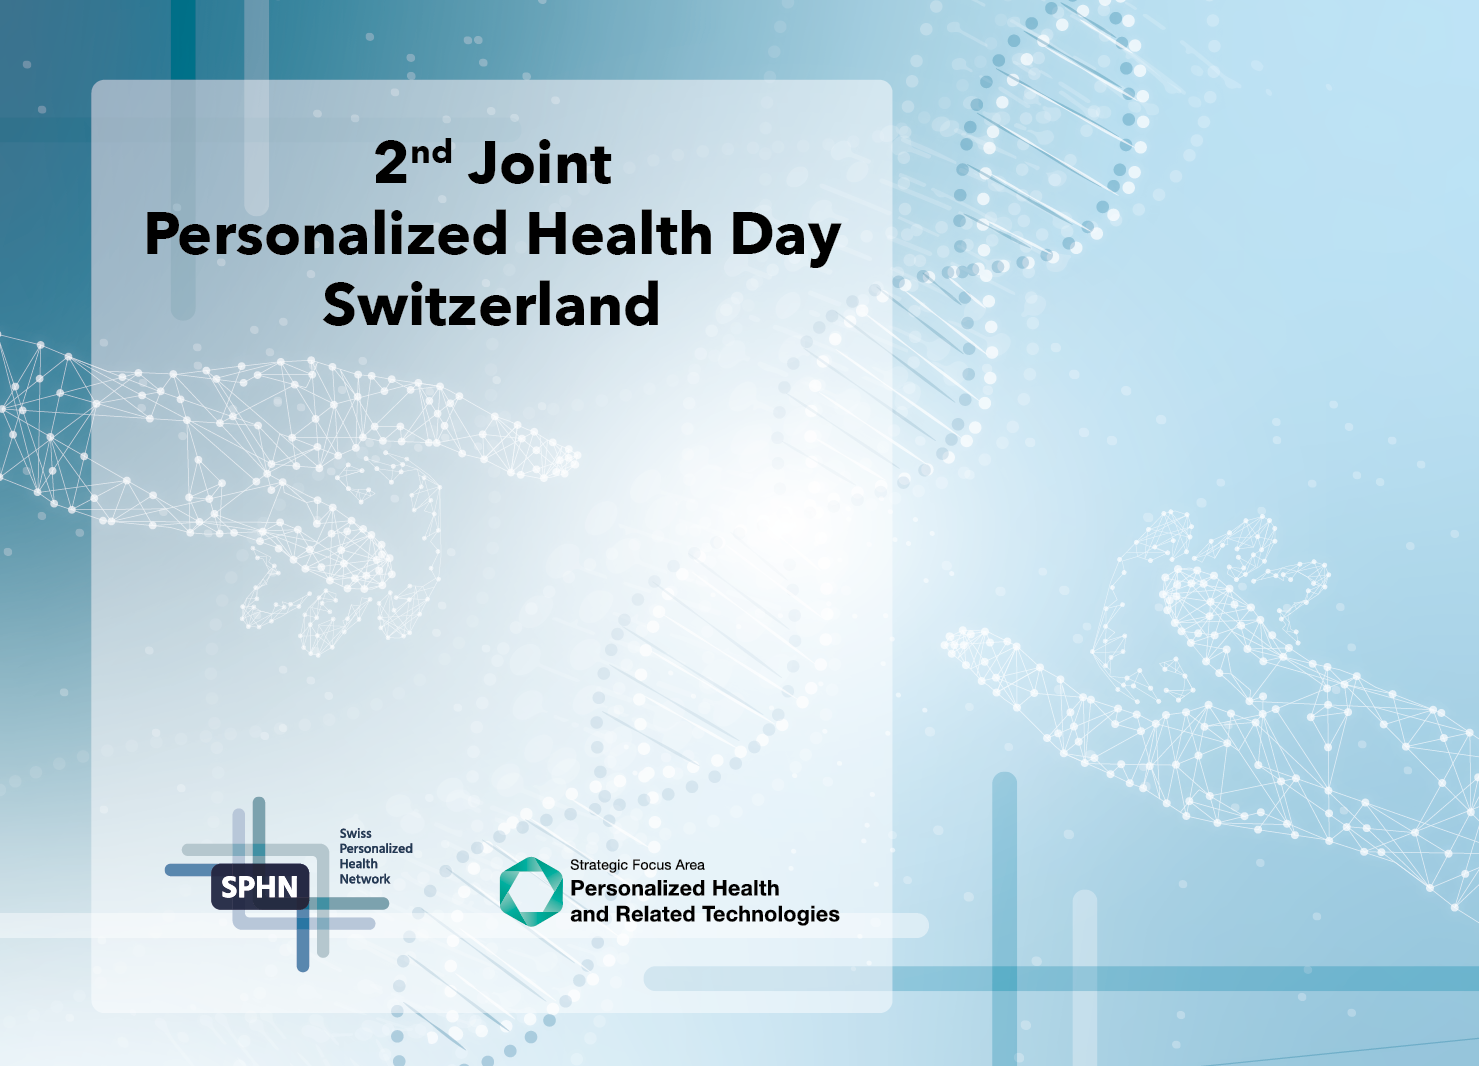 73490_Blumer_2nd_Joint-Personalized_HealthDay_Keyvisual_1_1479x1066px_MitTEXT